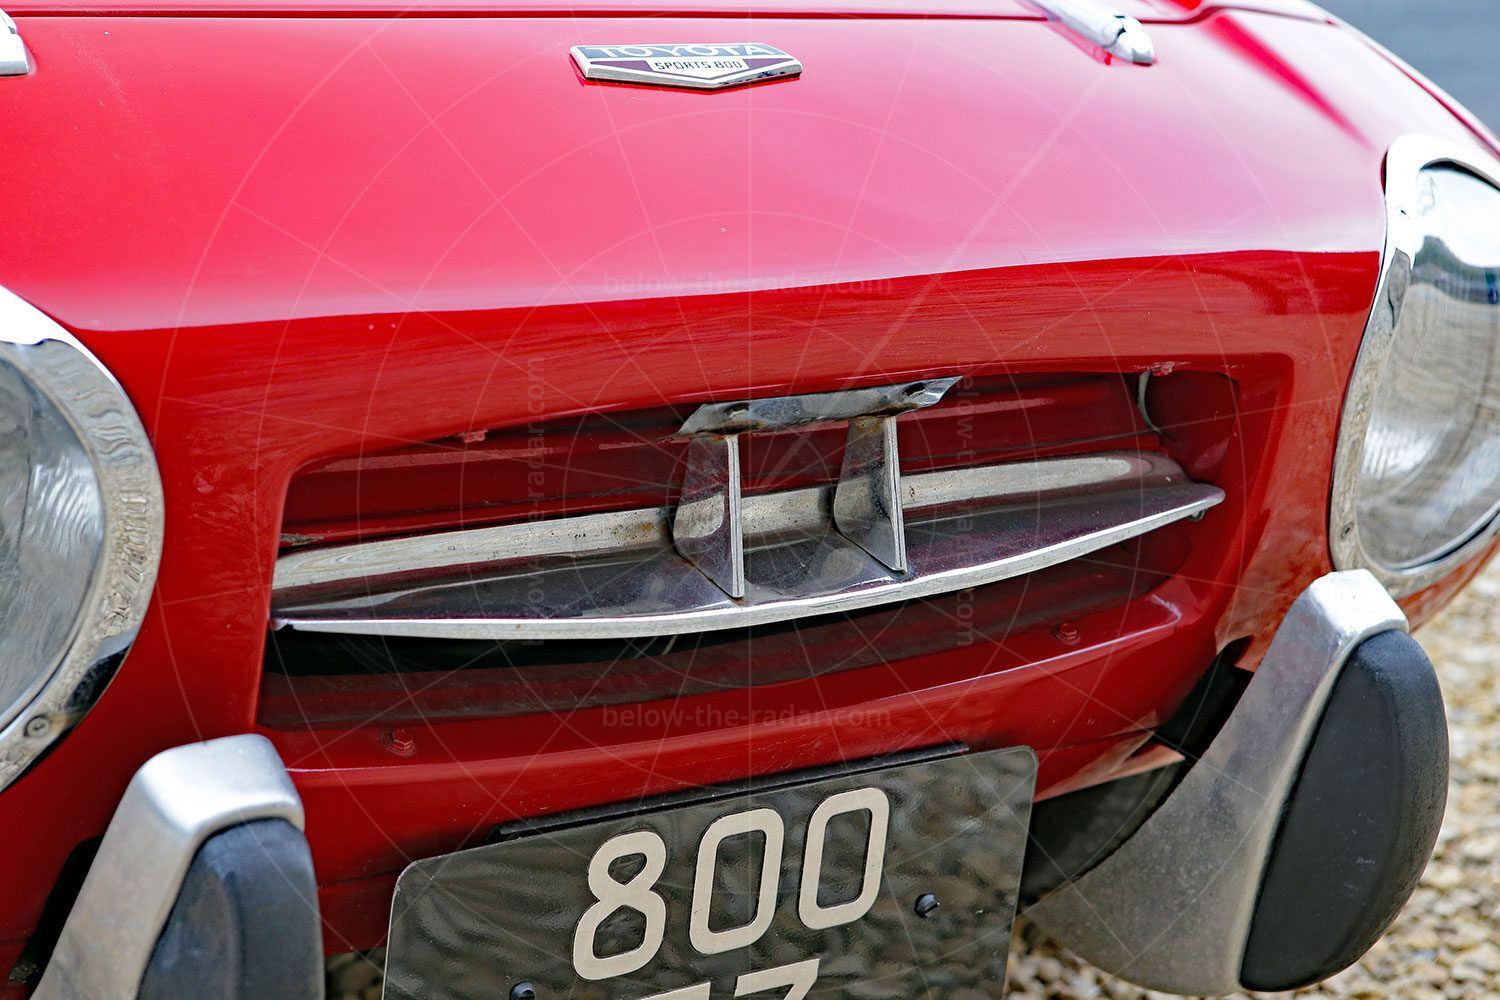 Toyota Sports 800 grille Pic: magiccarpics.co.uk | Toyota Sports 800 grille